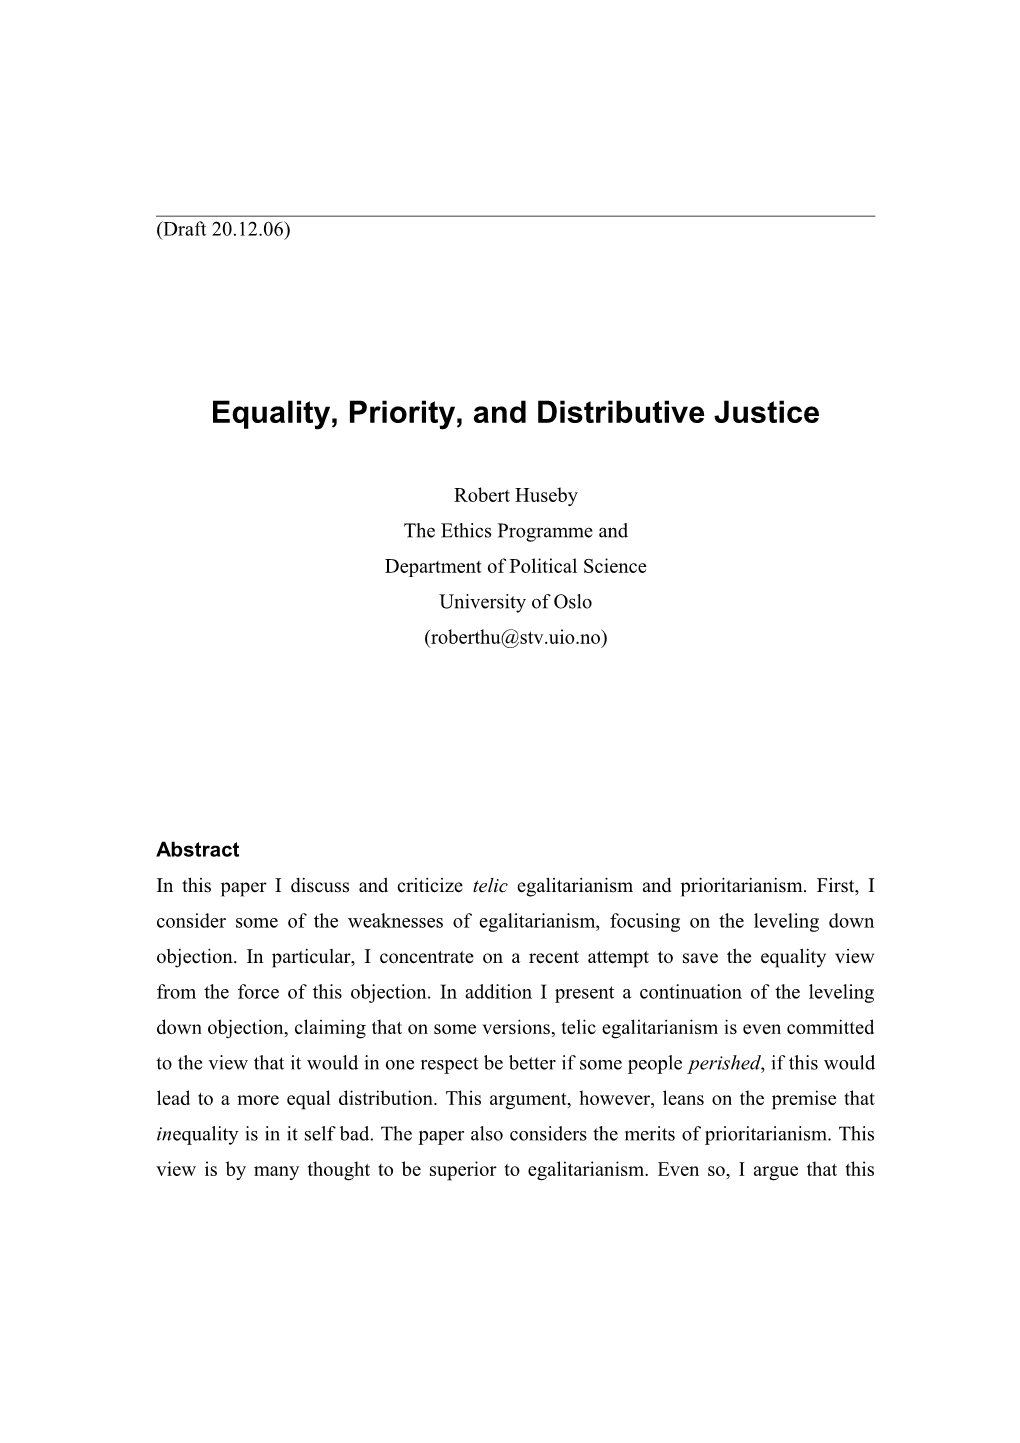 Equality, Priority, and Distributive Justice